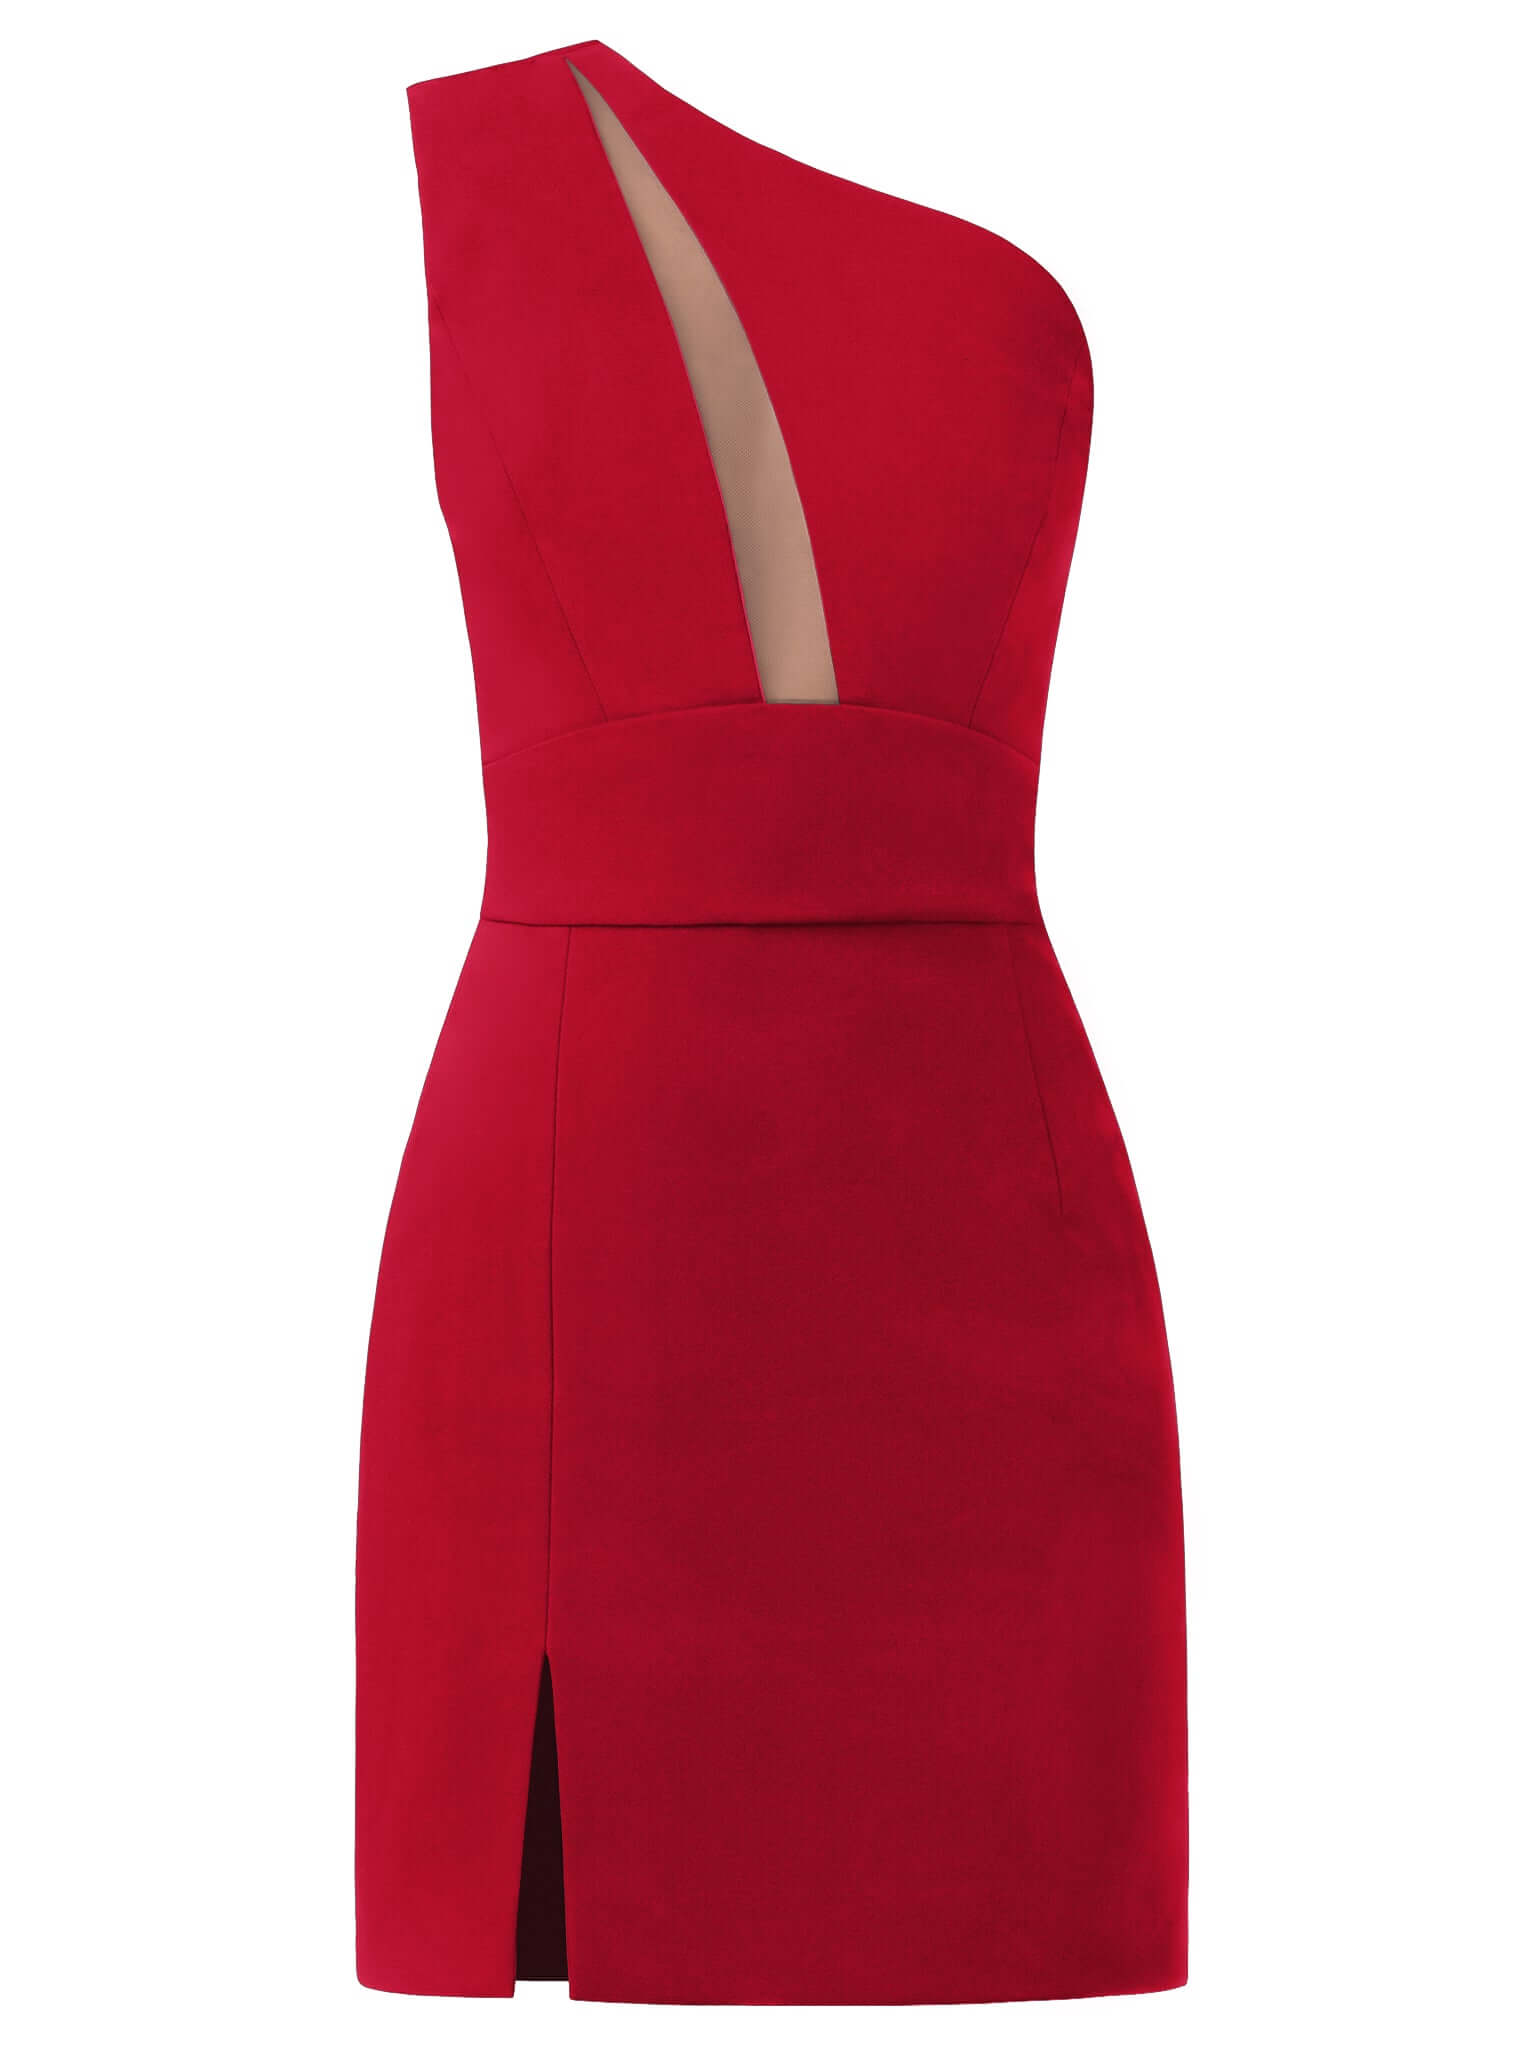 Tia Dorraine Love Weapon One-Shoulder Mini Dress - Red This mini dress showcases the sophisticated style and modern allure of Tia Dorraine. Its confidently feminine figure-hugging silhouette pairs with an asymmetrical neckline and cut-out bodice details f